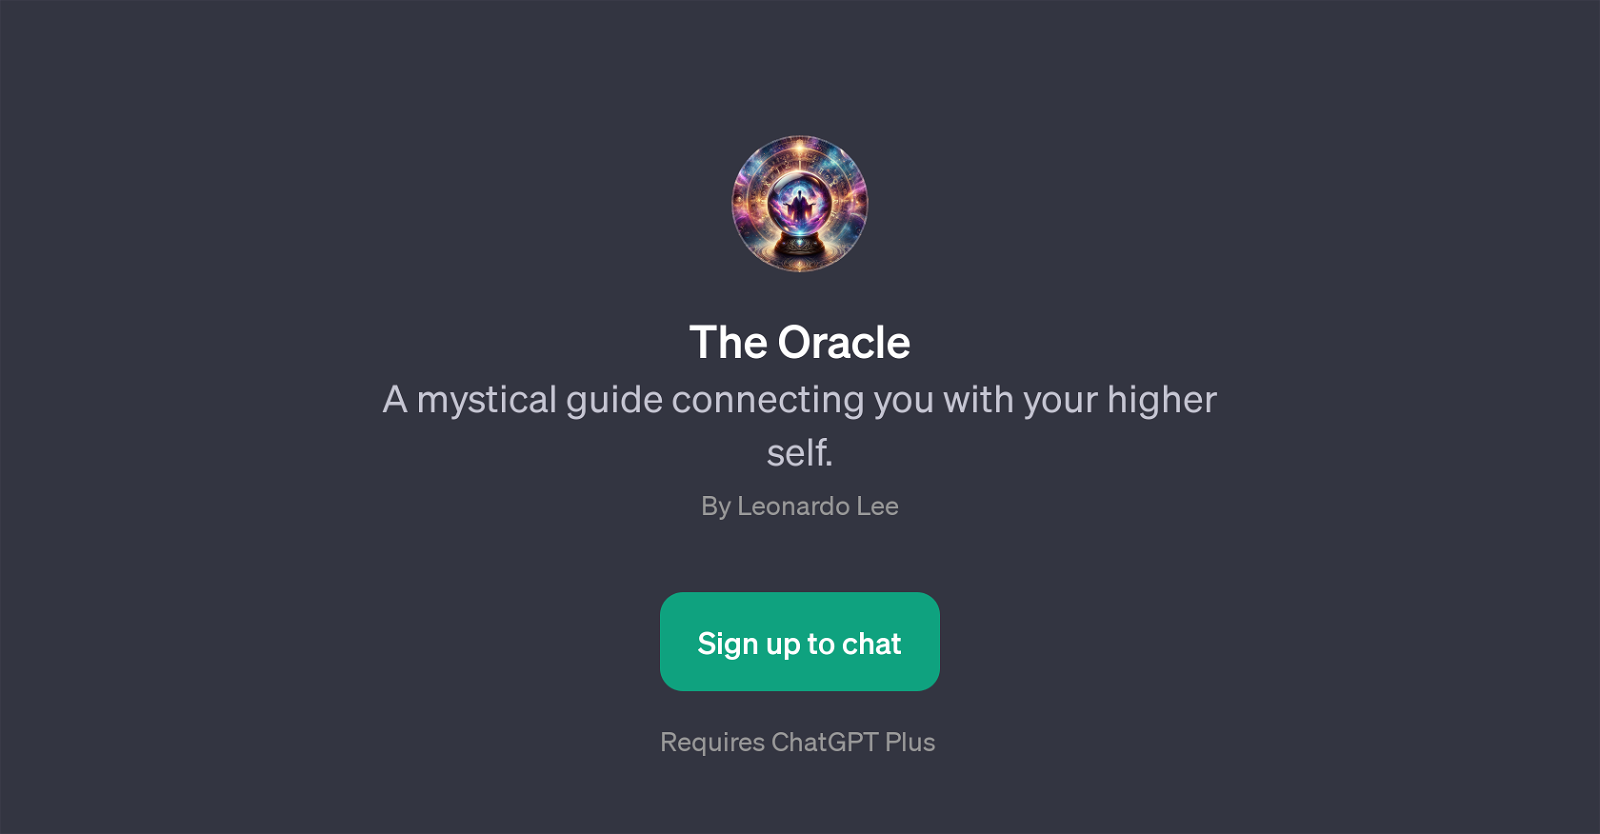 The Oracle website